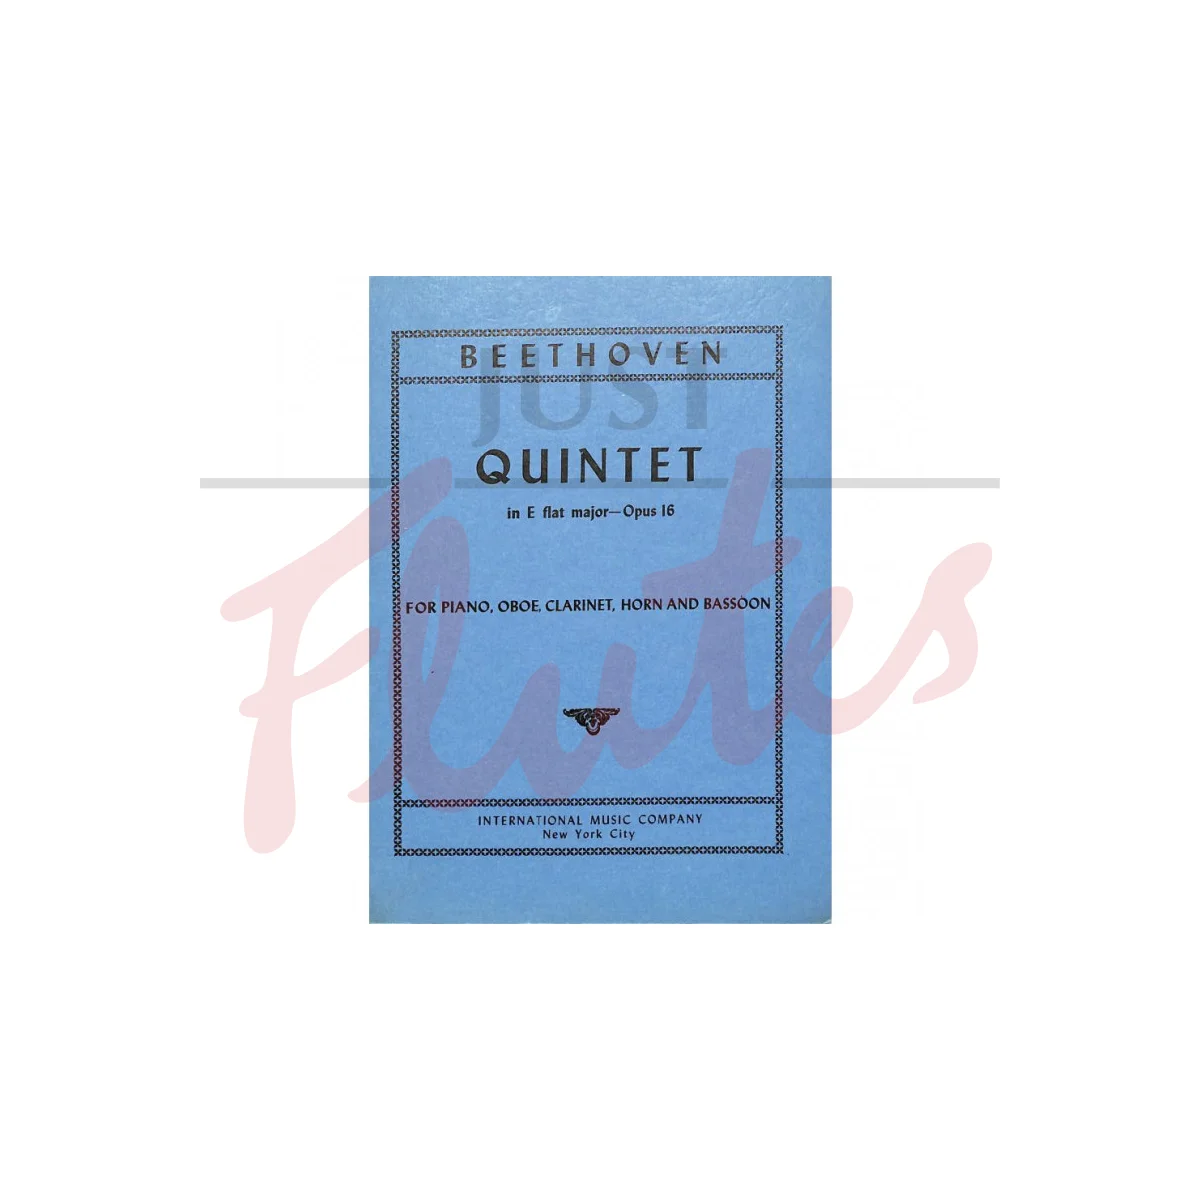 Quintet in Eb major for Oboe, Clarinet, Horn, Bassoon and Piano